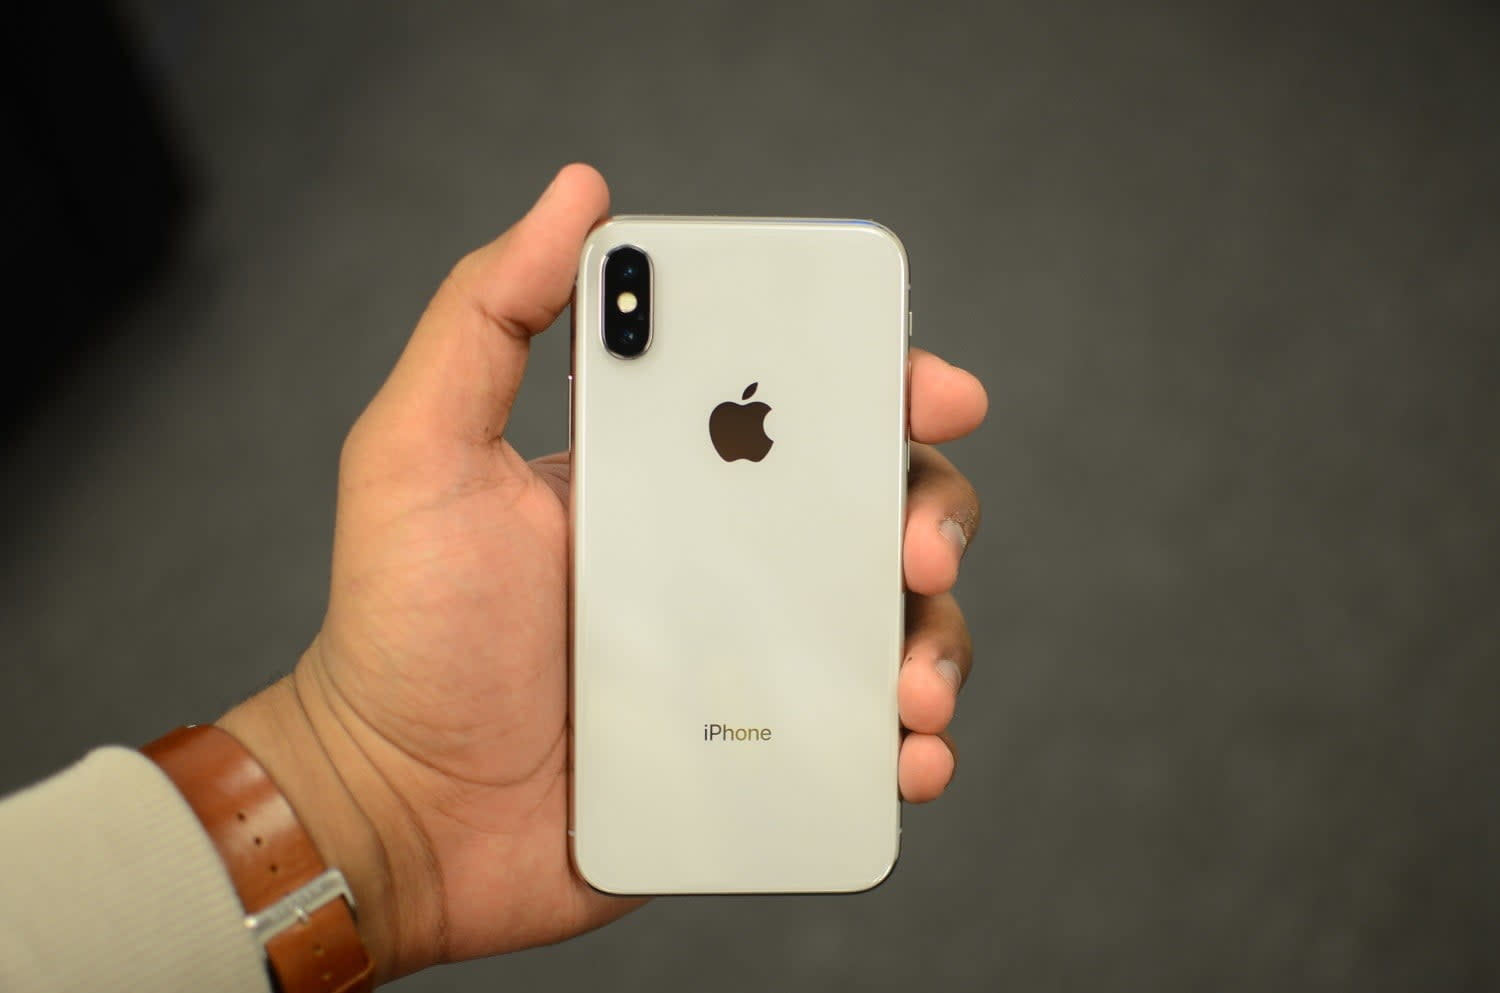 Sprint holds another flash sale, offers the iPhone X for $5 per month